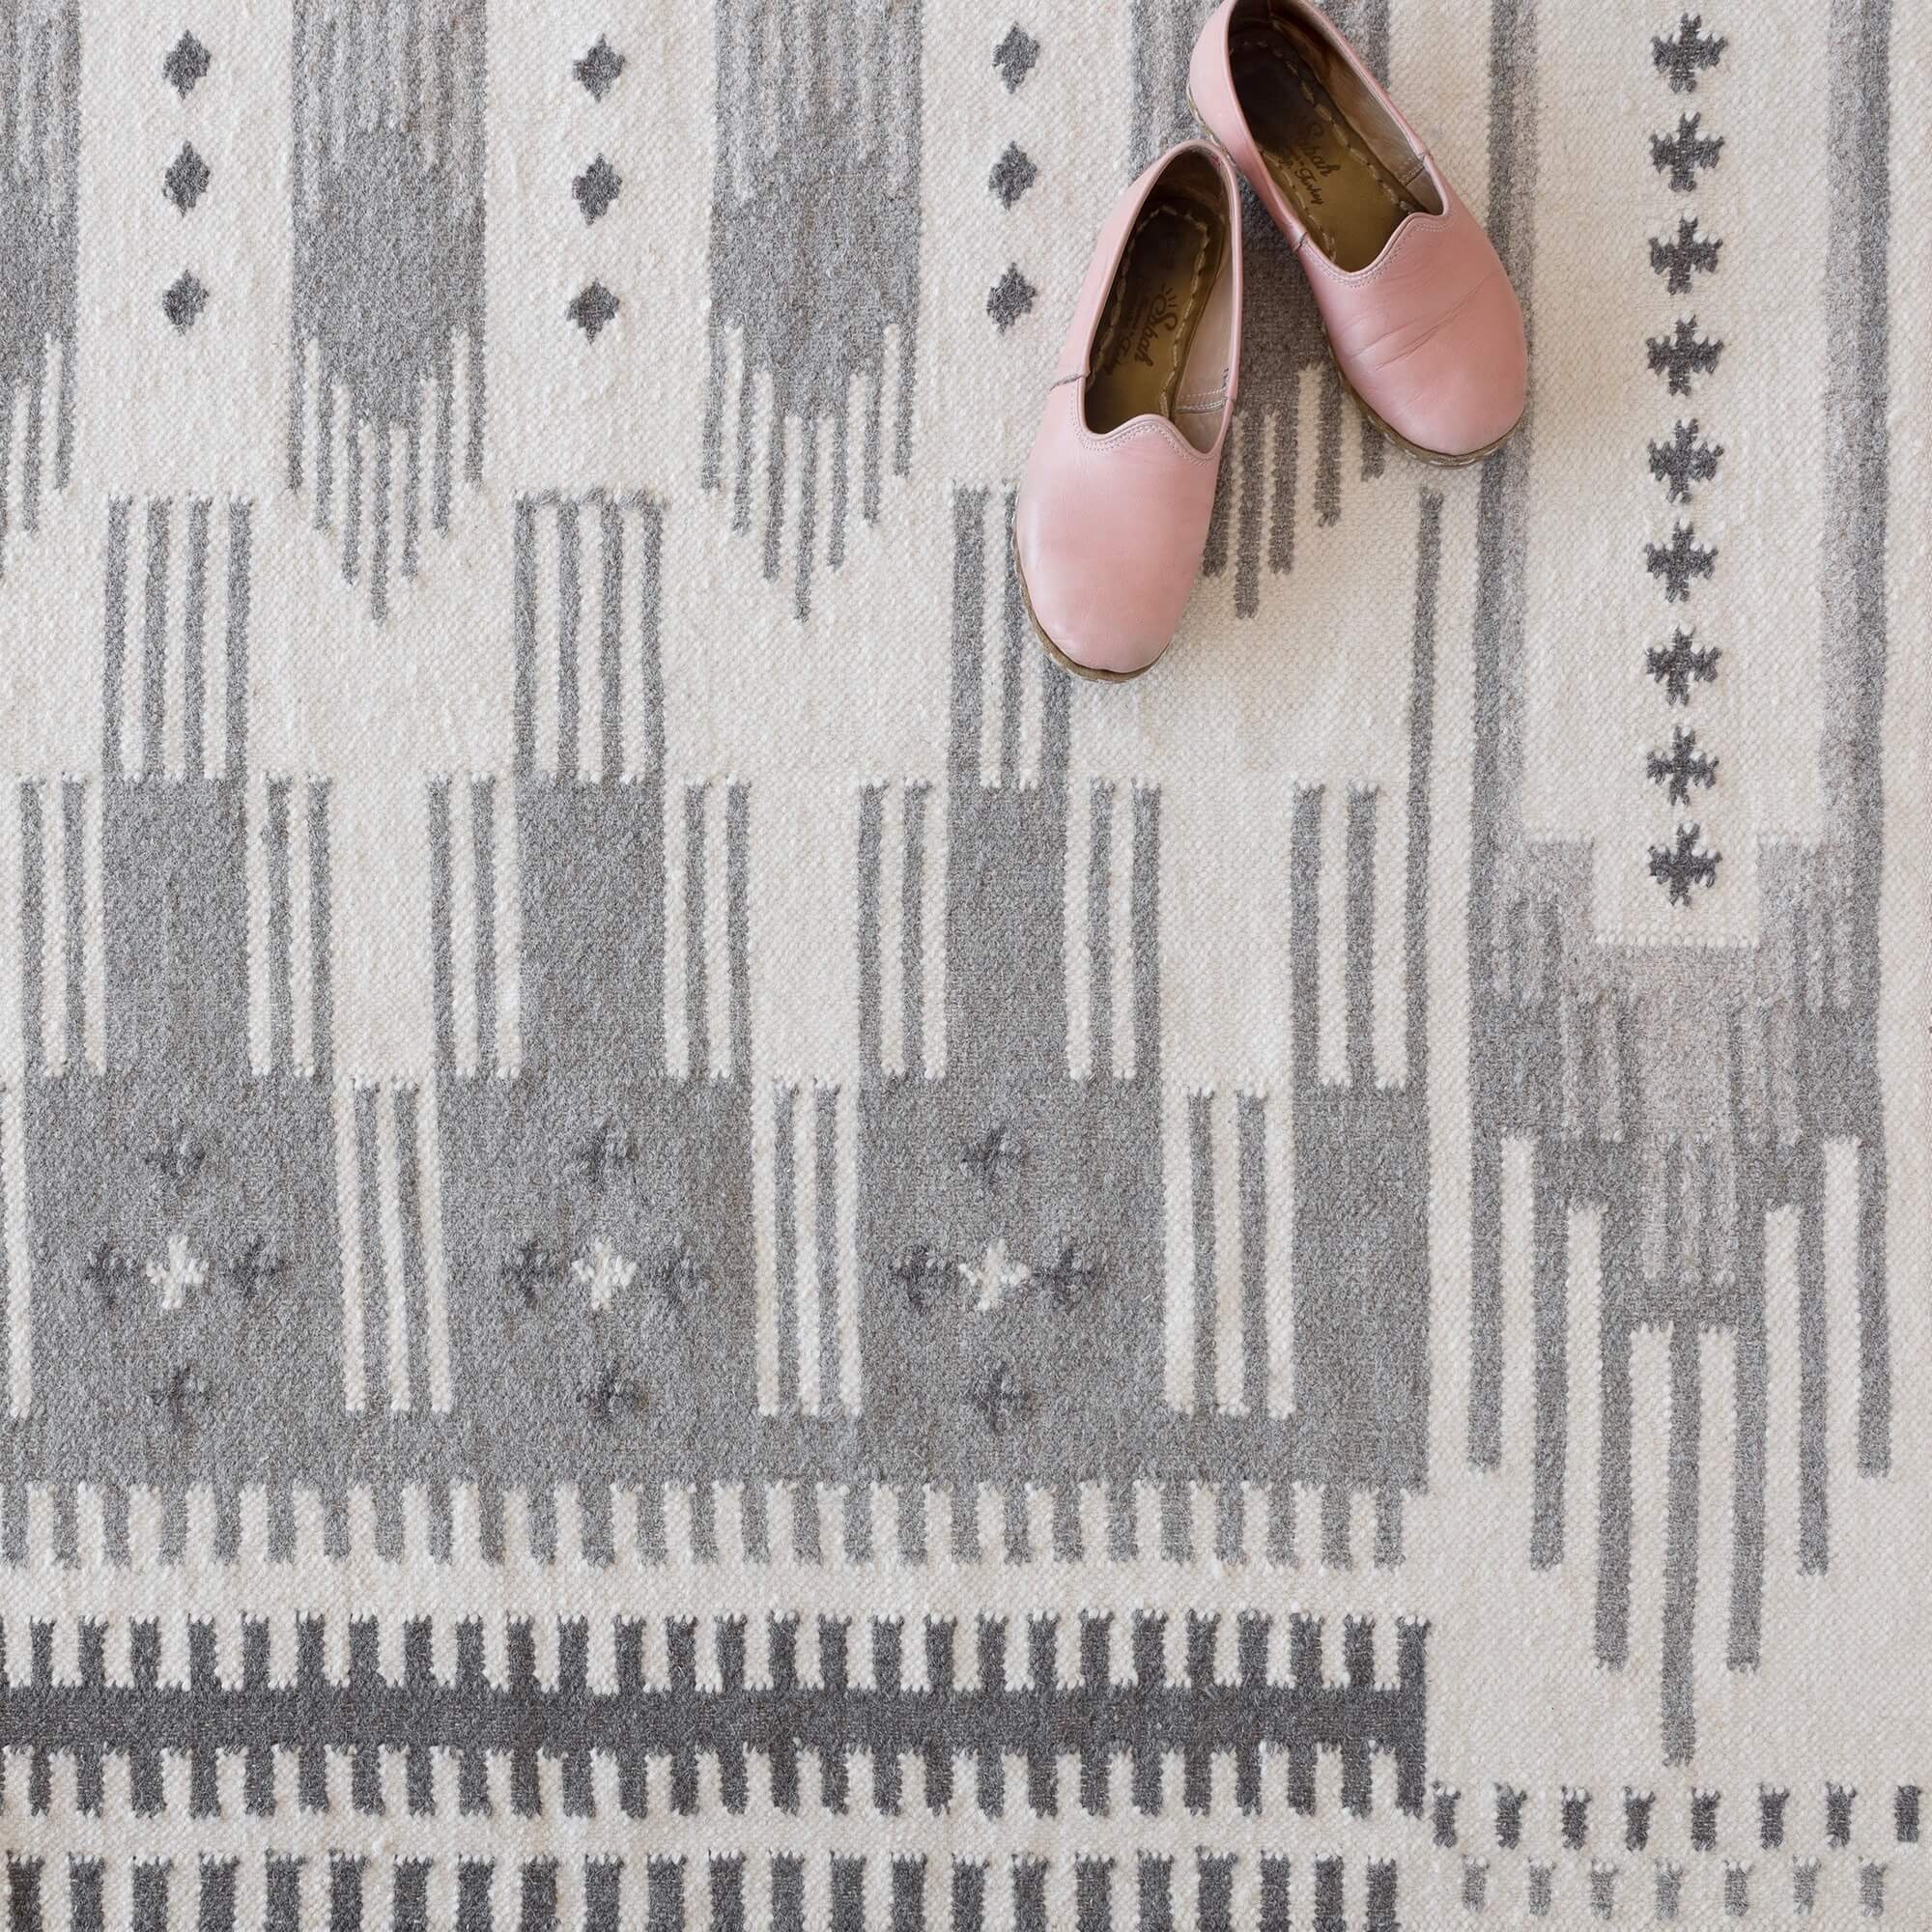 The Citizenry Asha Handwoven Area Rug | 9' x 12' | Grey - Image 5